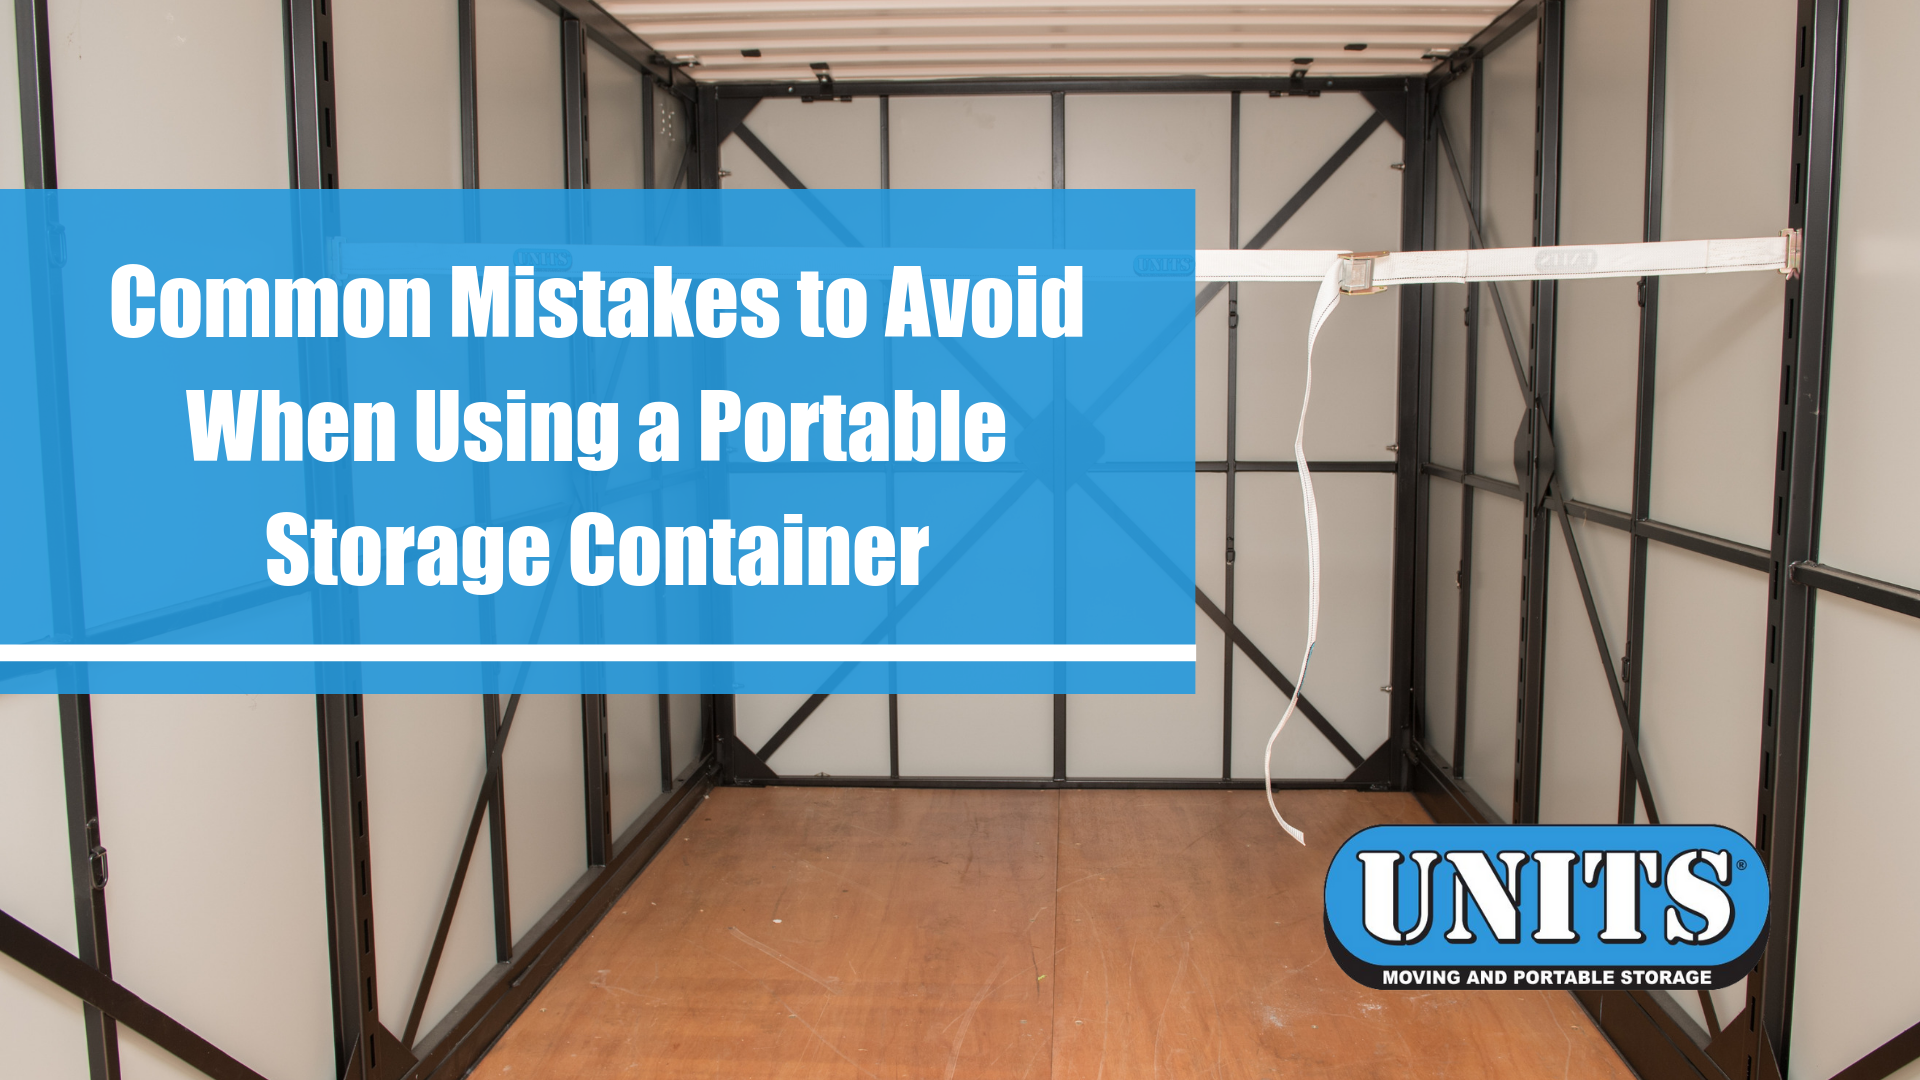 Common Mistakes to Avoid When Using a Portable Storage Container